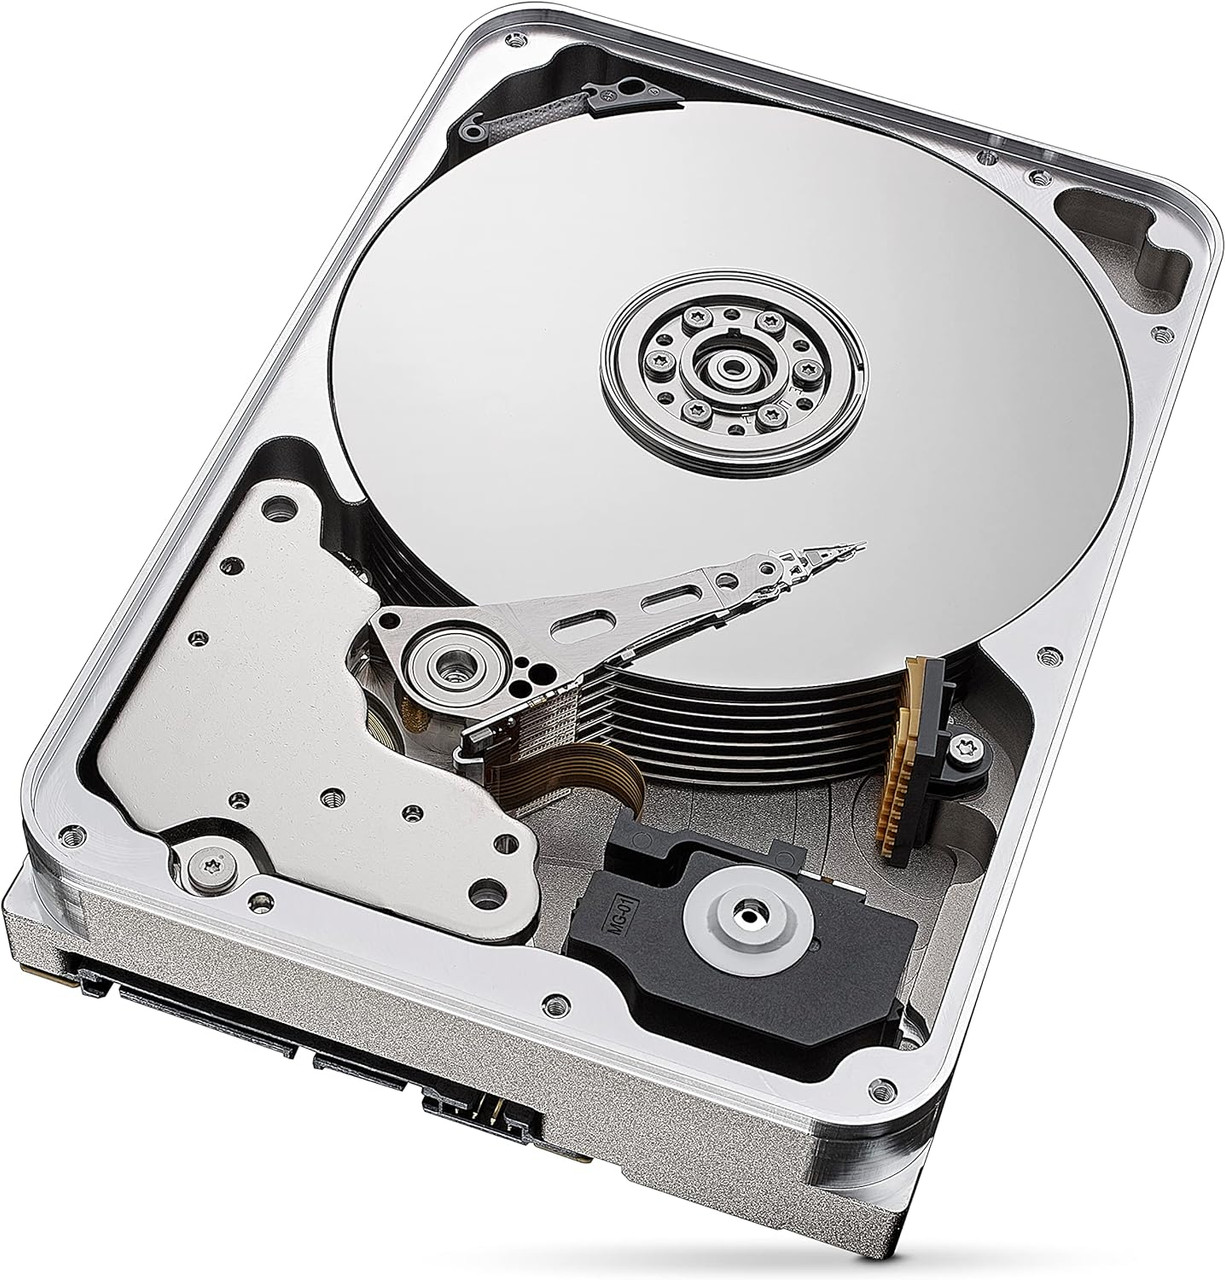 Seagate IronWolf Pro 16TB Enterprise NAS Internal HDD 3.5 Inch SATA 6Gb/s 7200 RPM 256MB Cache ST16000NT001 (Pack of 2)